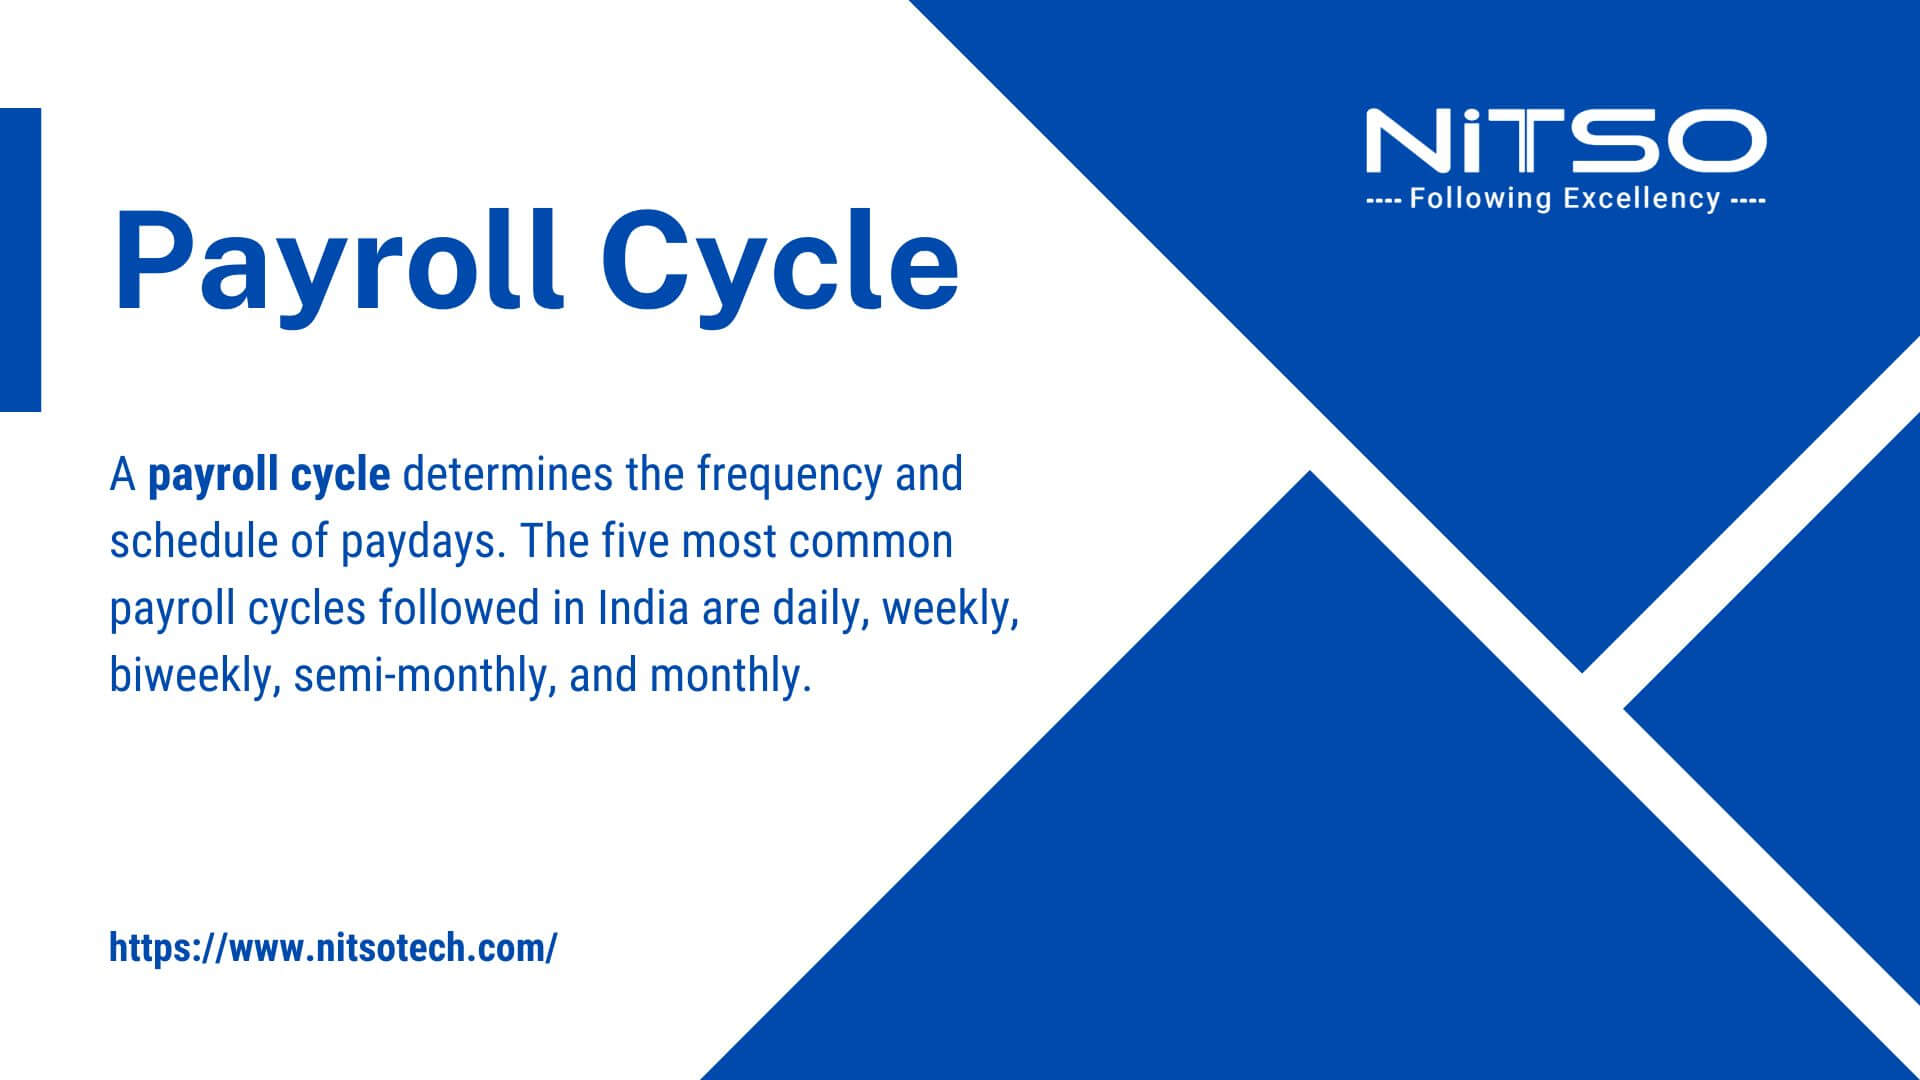 What is a Payroll Cycle And Why is it Important?